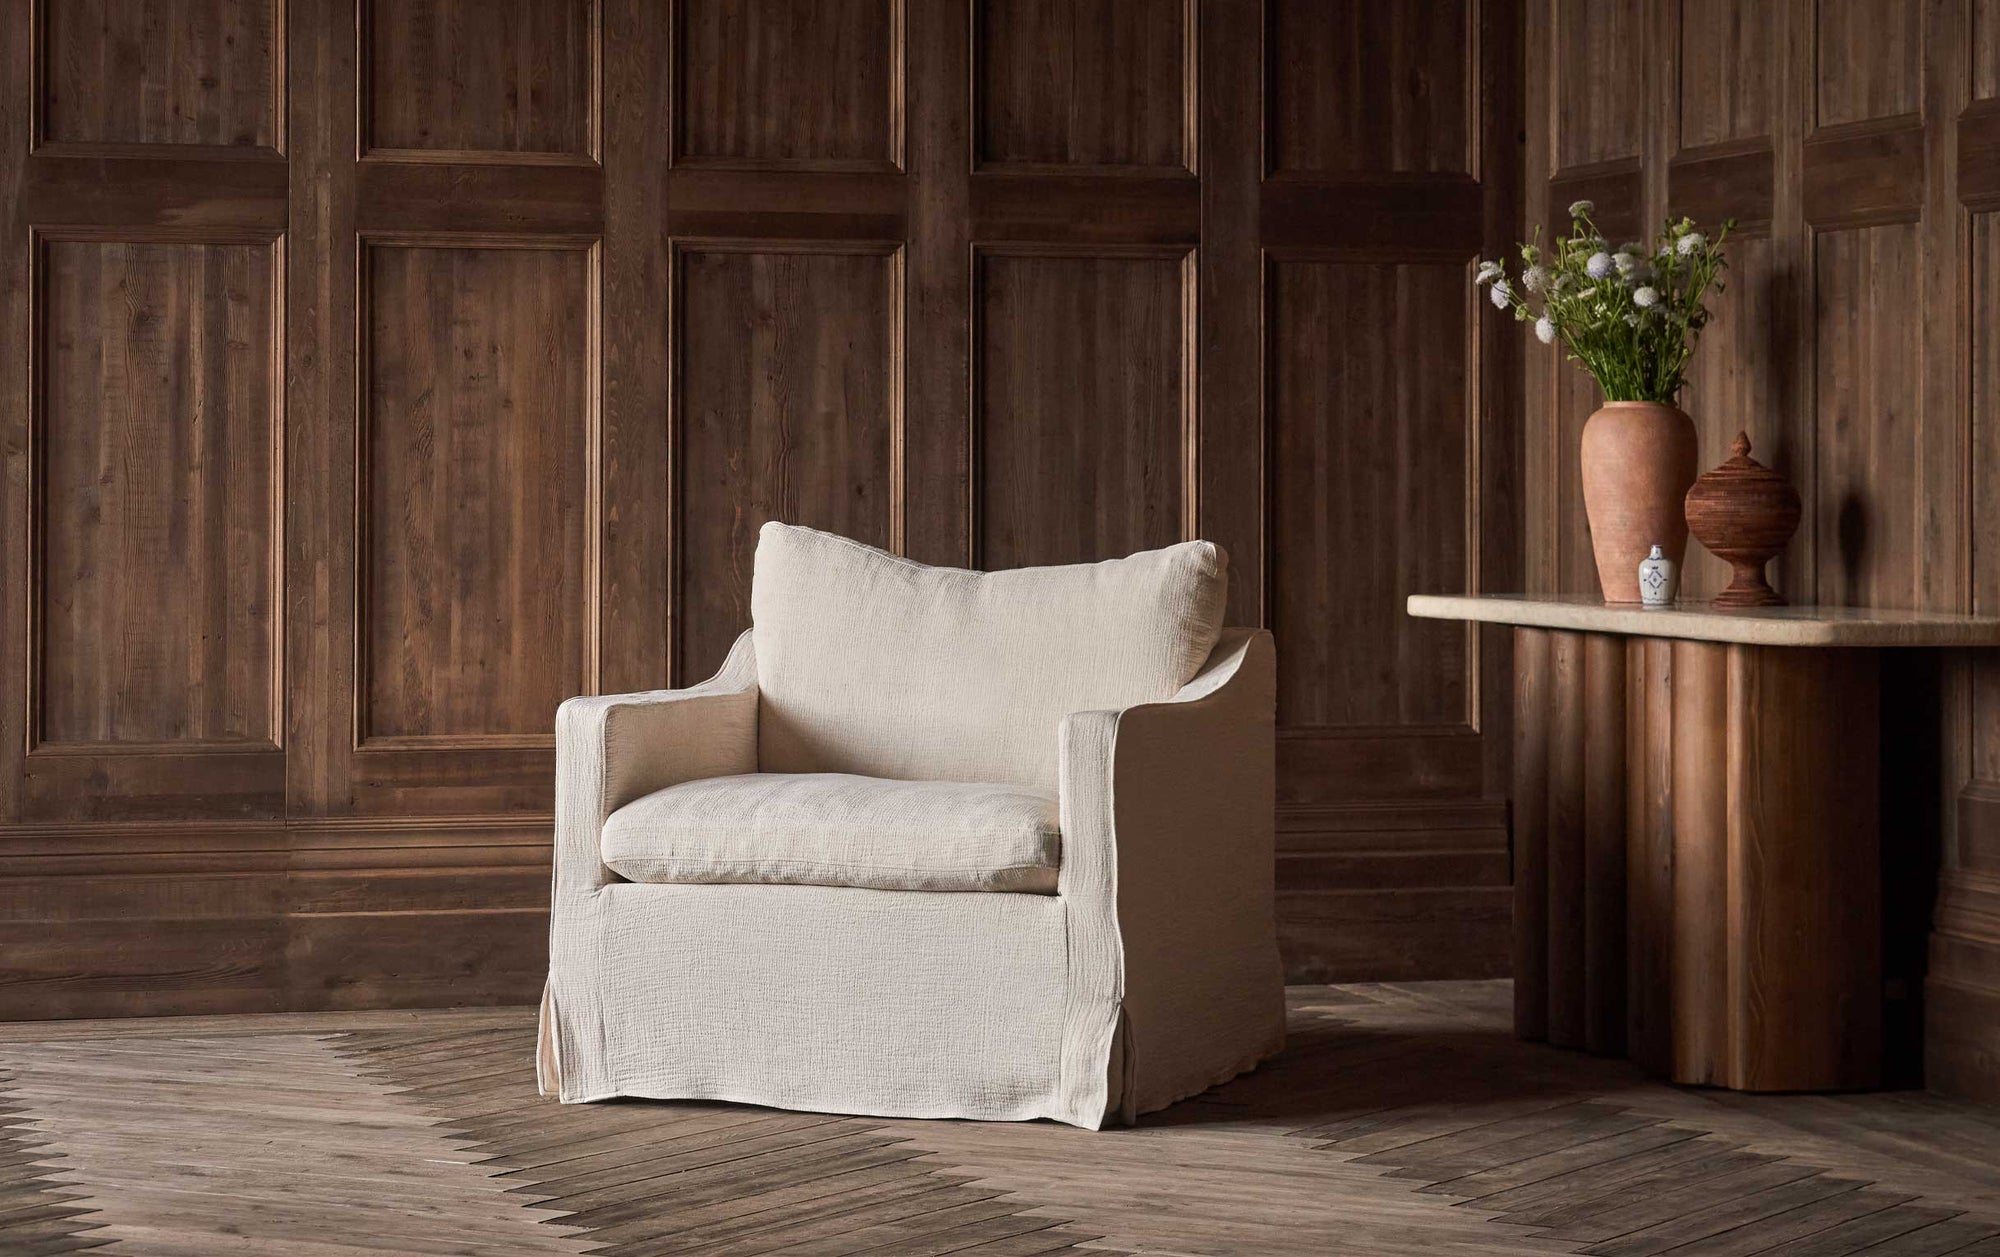 Amelia Swivel Chair in Corn Silk, a light beige Washed Cotton Linen, placed in a wood panneled room next to an Enzo Console Table decorated with a vase of flowers